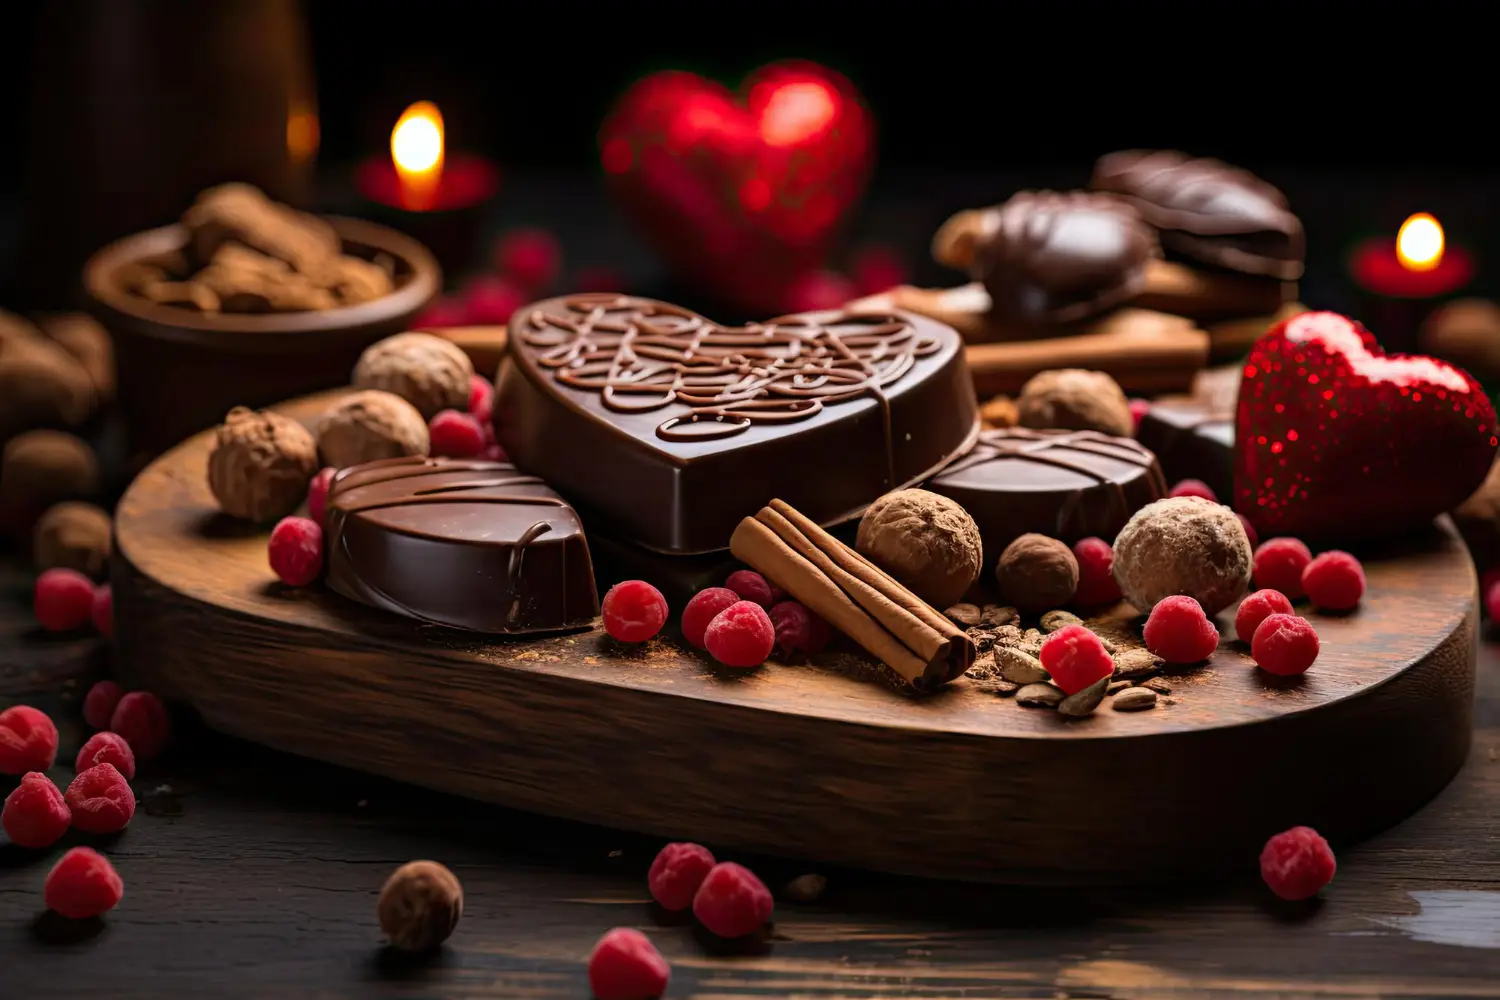 Indulge in Gourmet Chocolate with Love Cocoa’s Ethical Treats